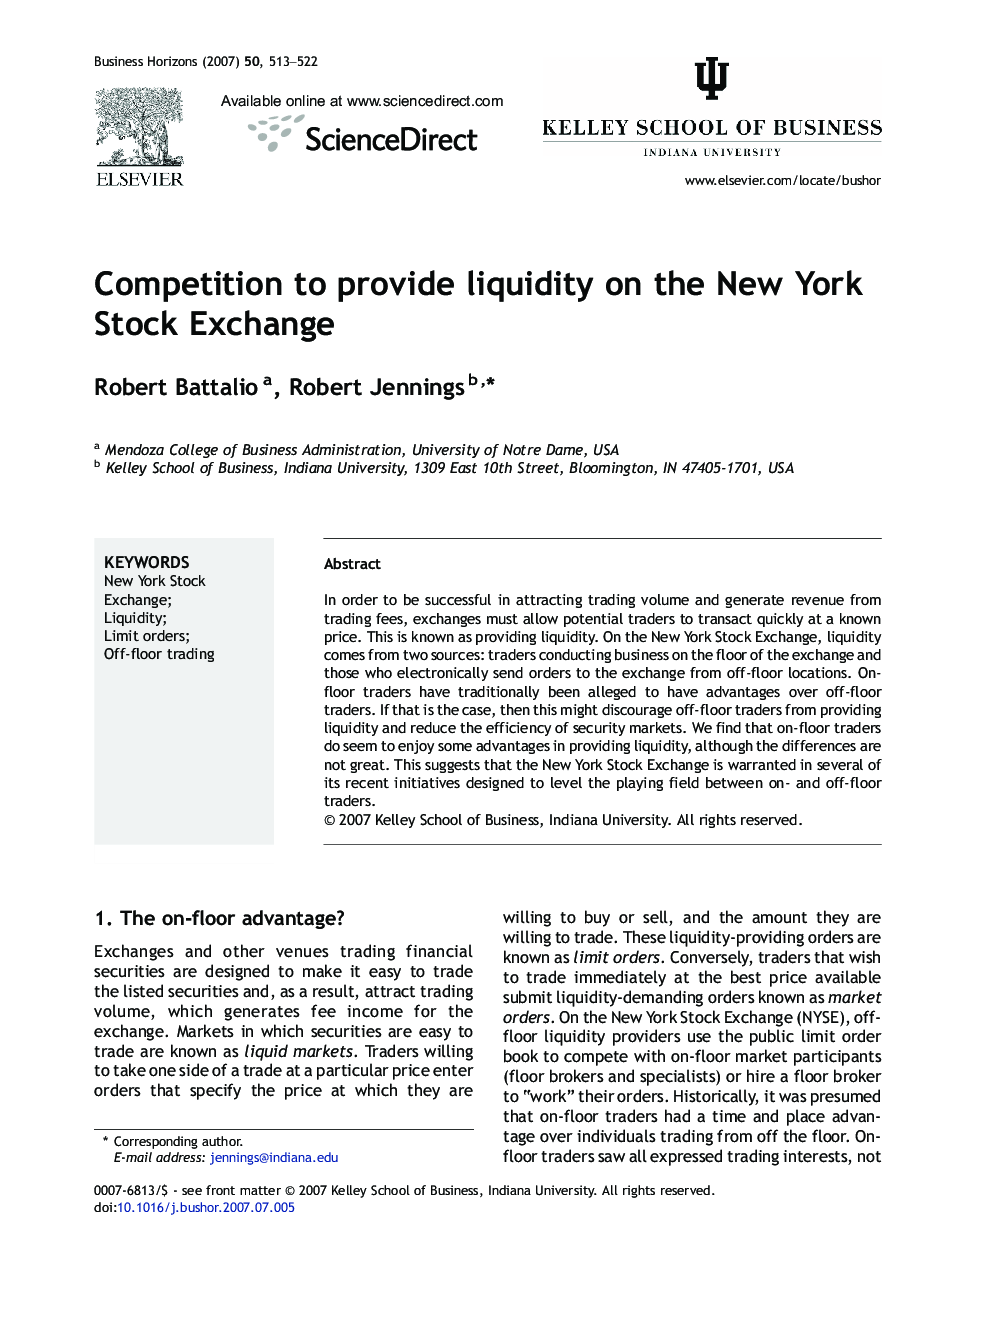 Competition to provide liquidity on the New York Stock Exchange